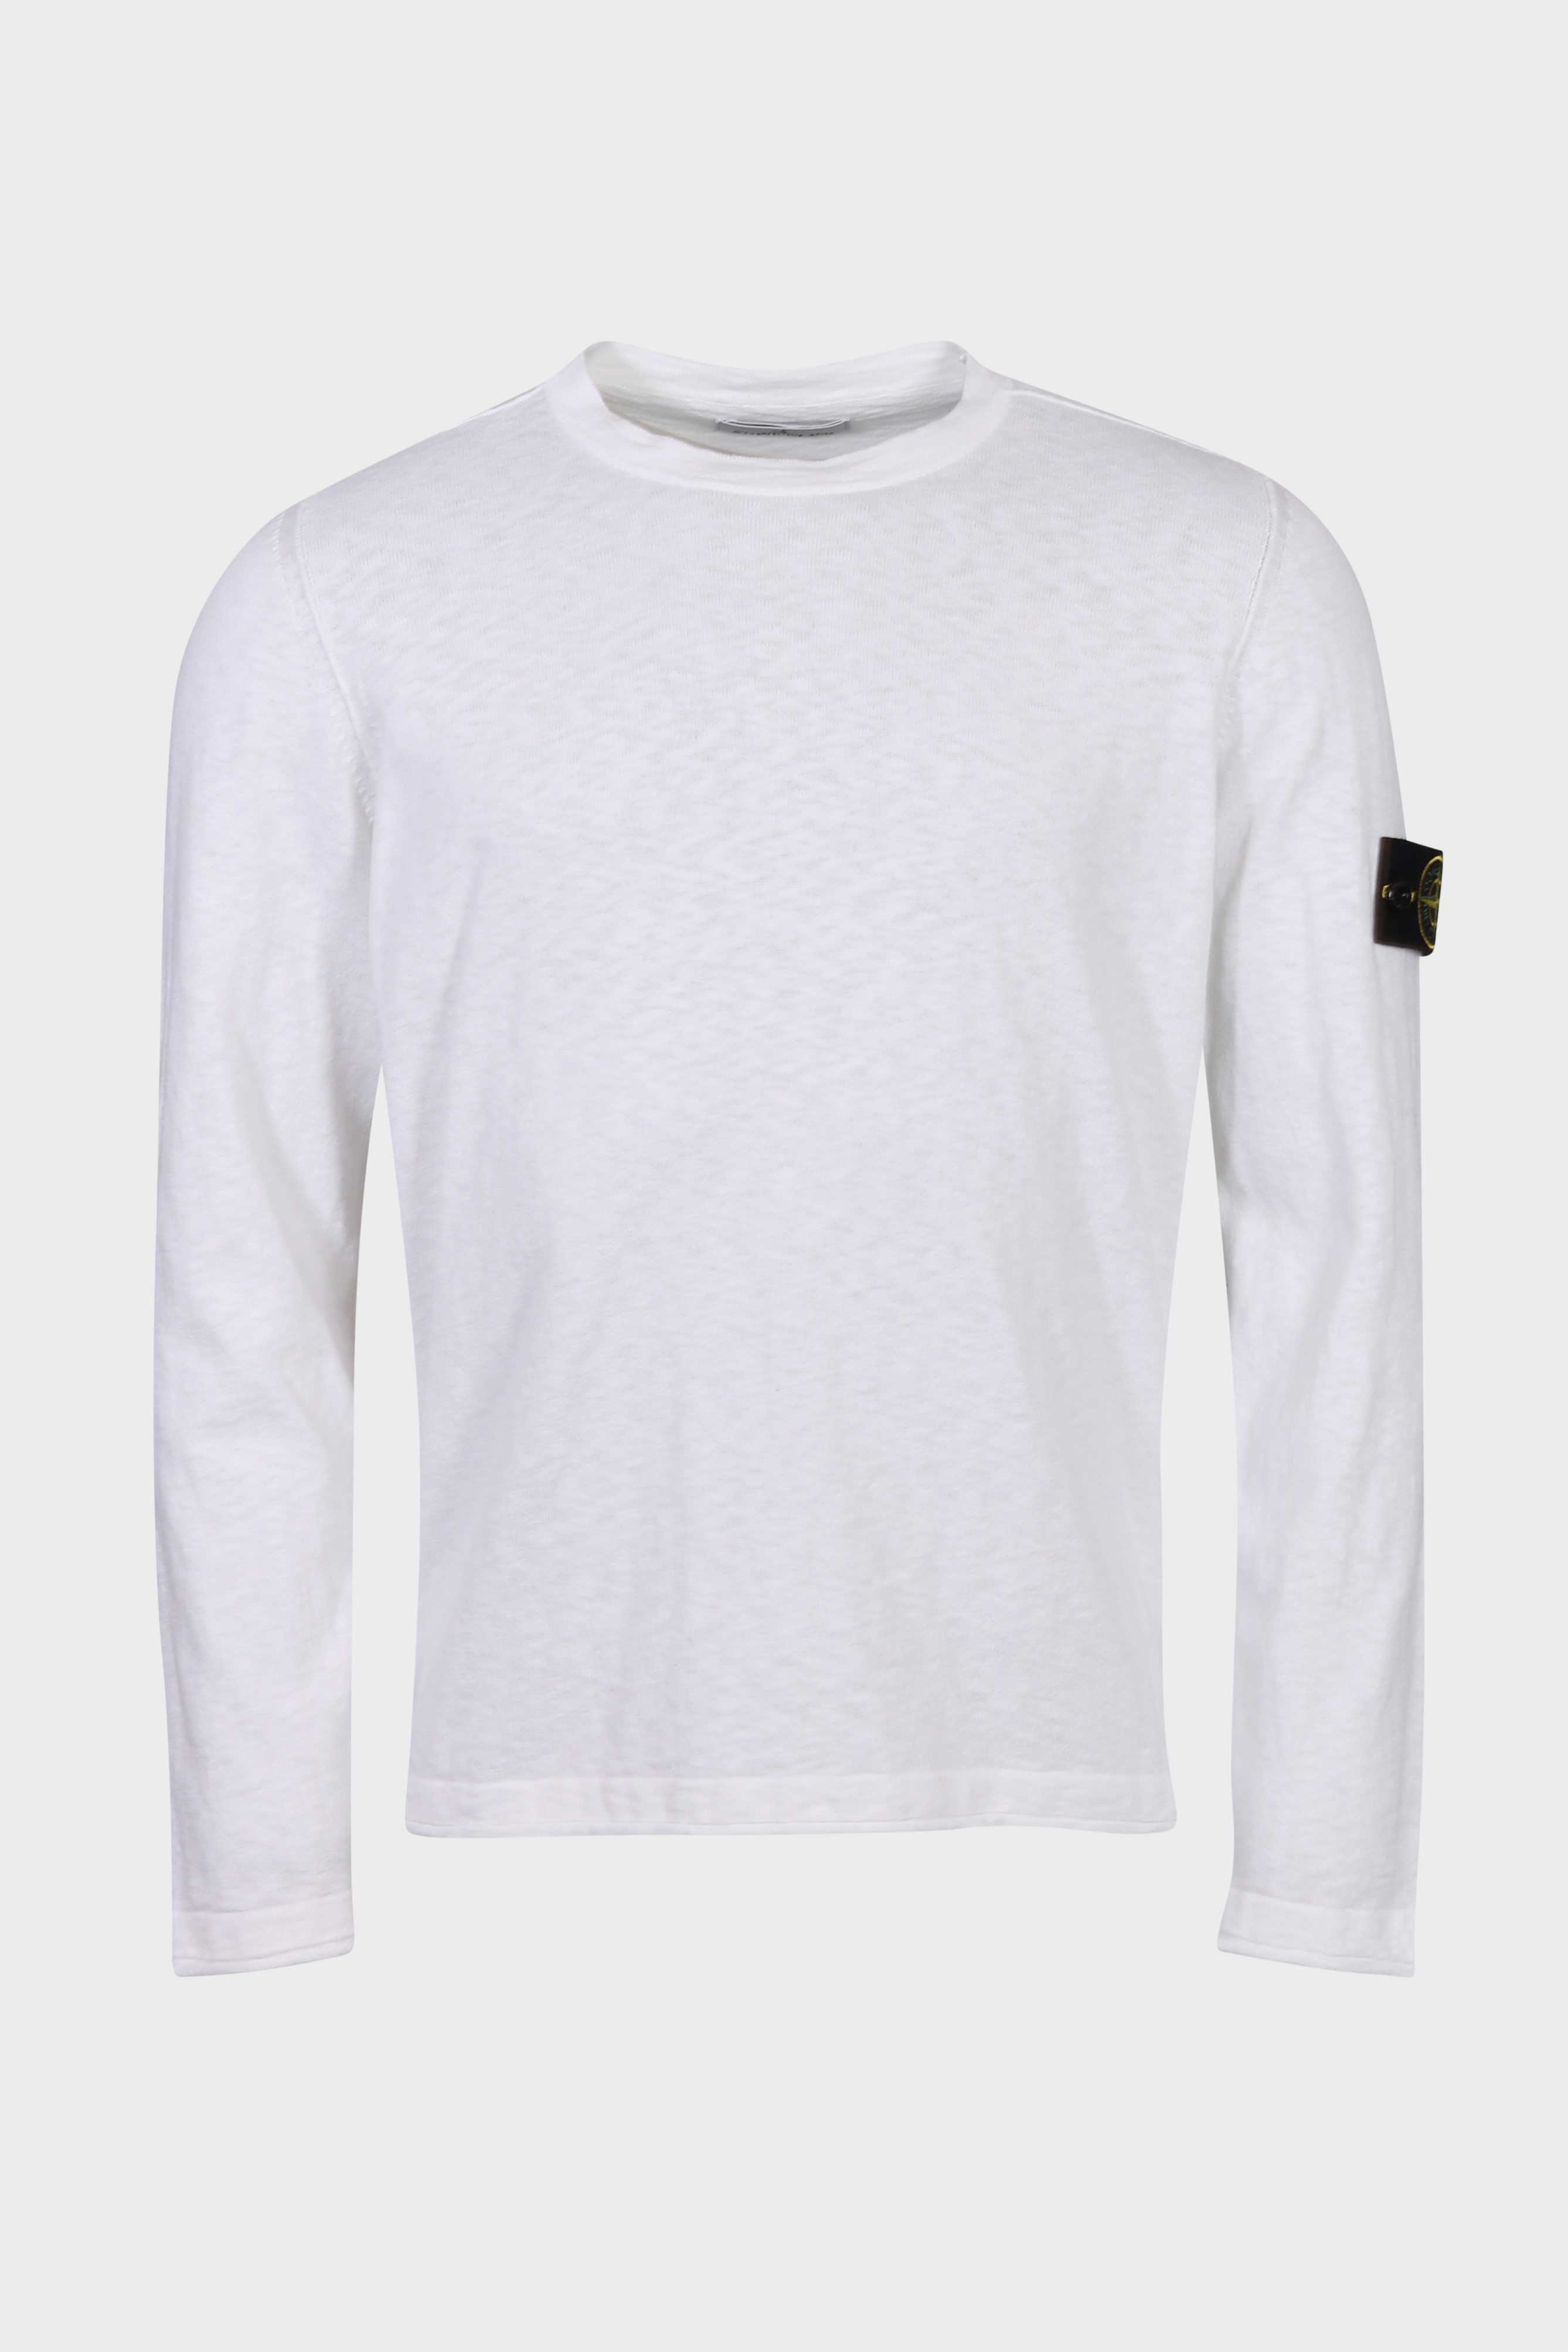 STONE ISLAND Summer Knit Pullover in White 2XL